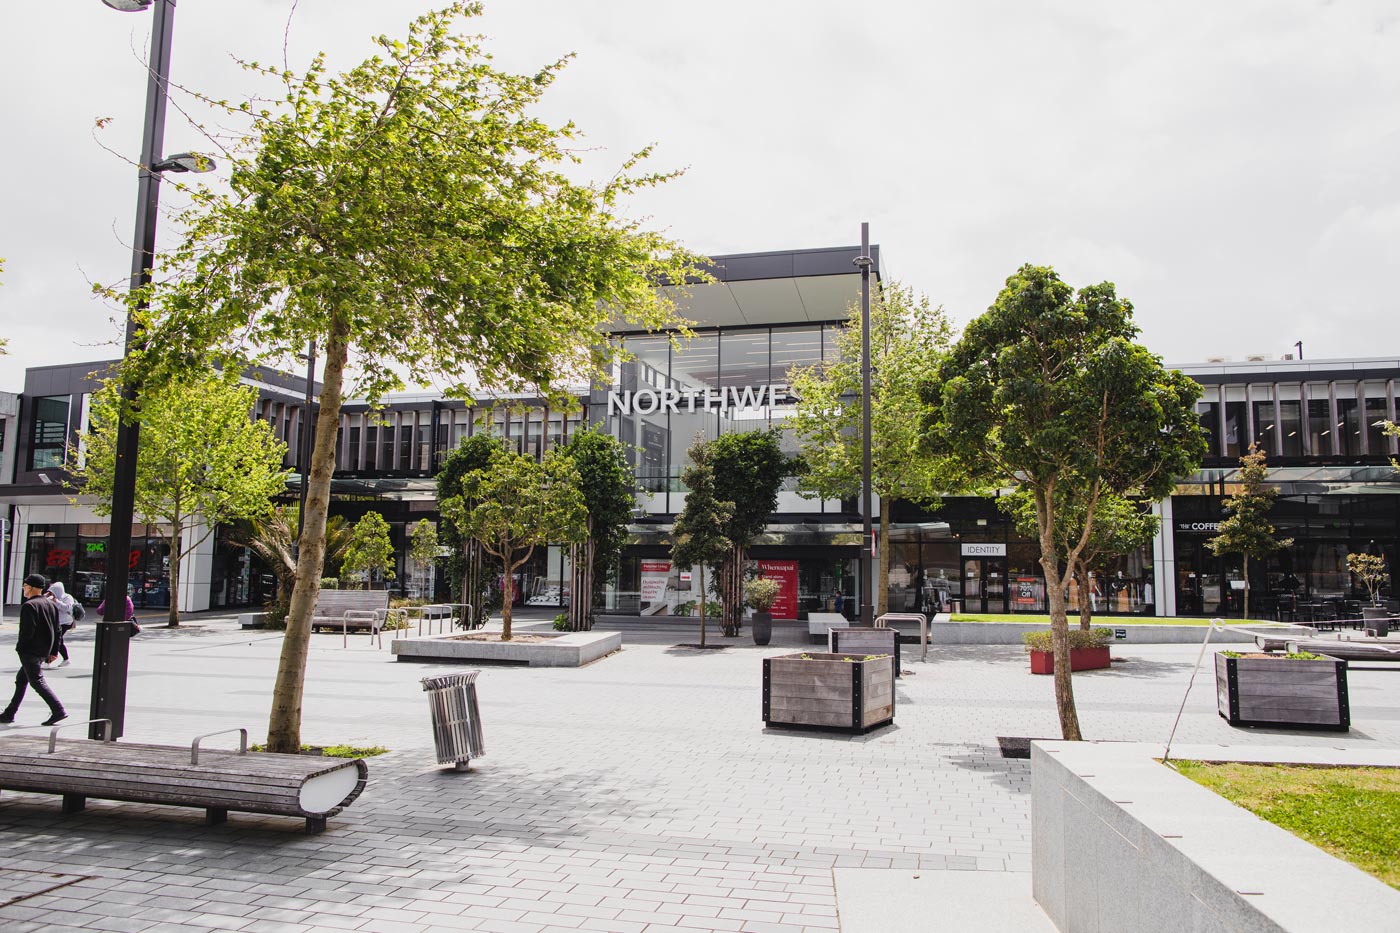 NorthWest Shopping Centre, as seen from Town Square